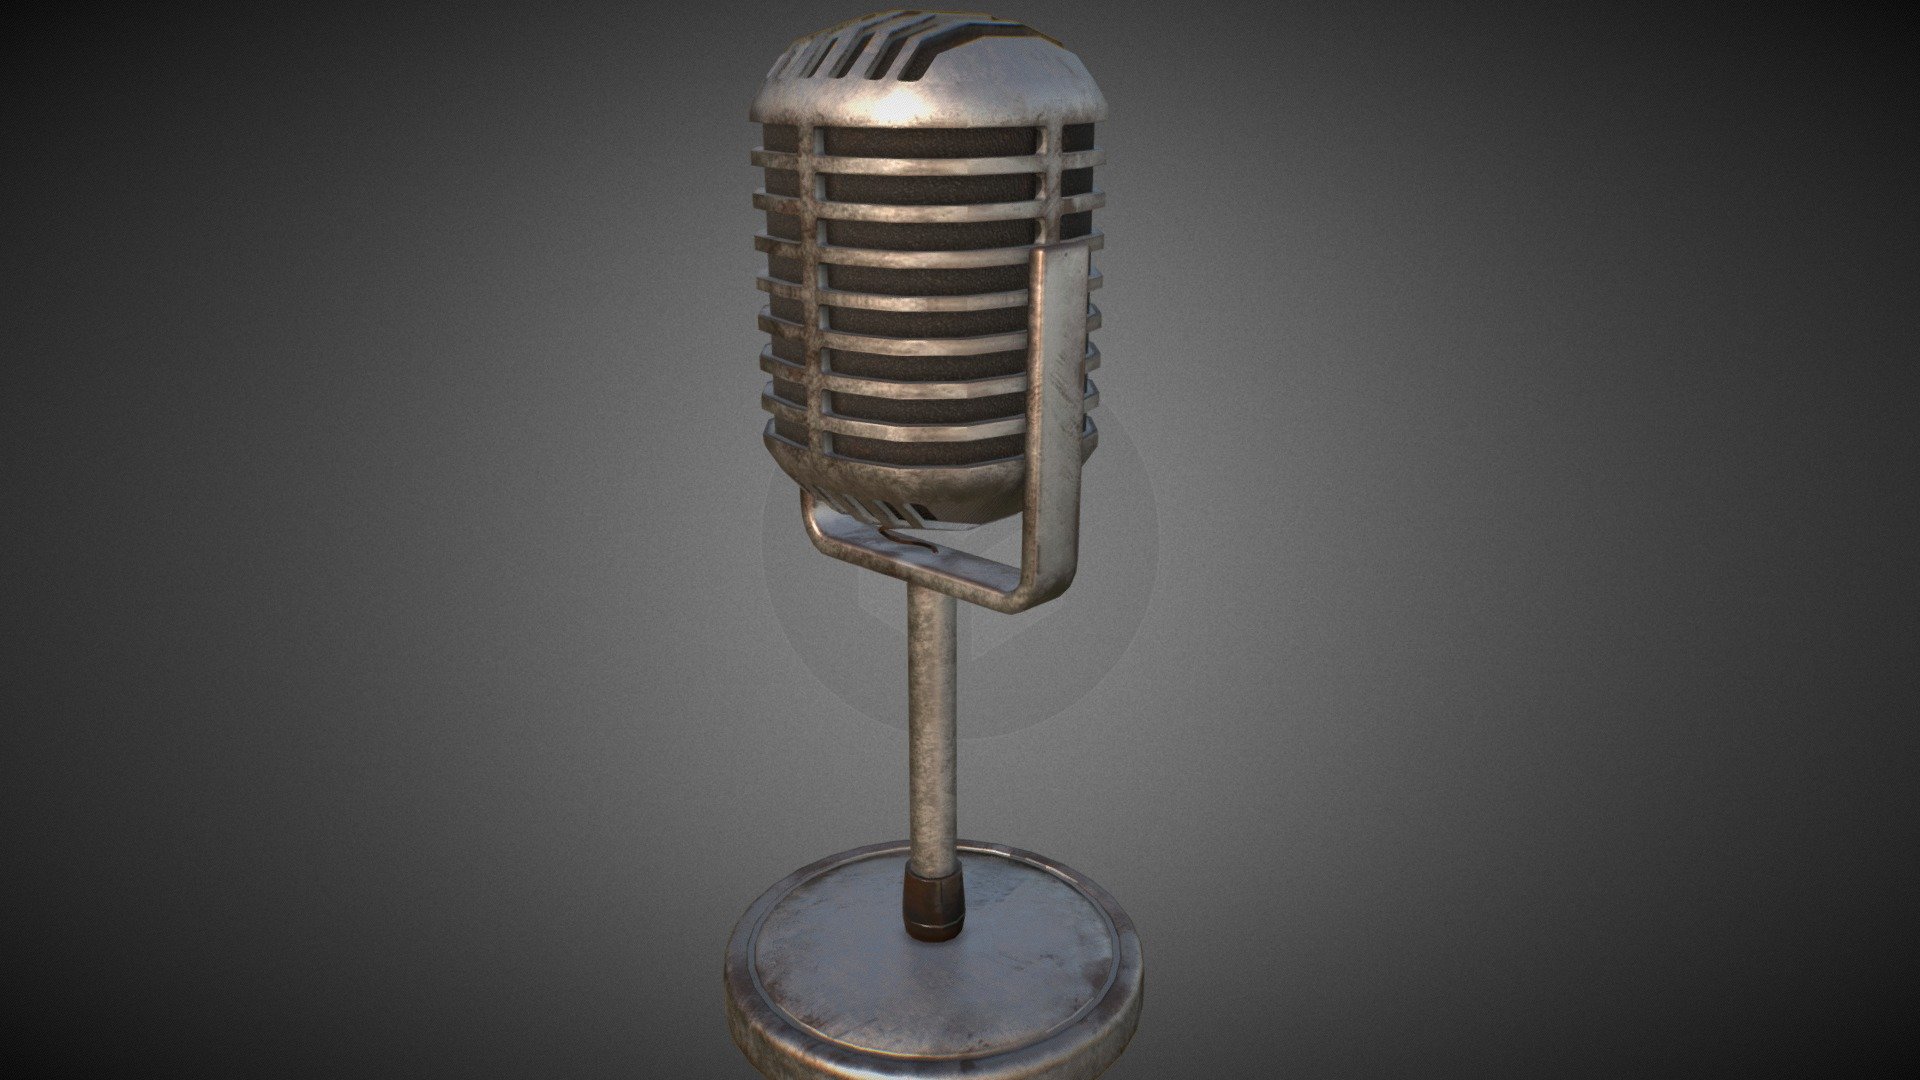 Vintage Microphone With Stan by Polygon3d